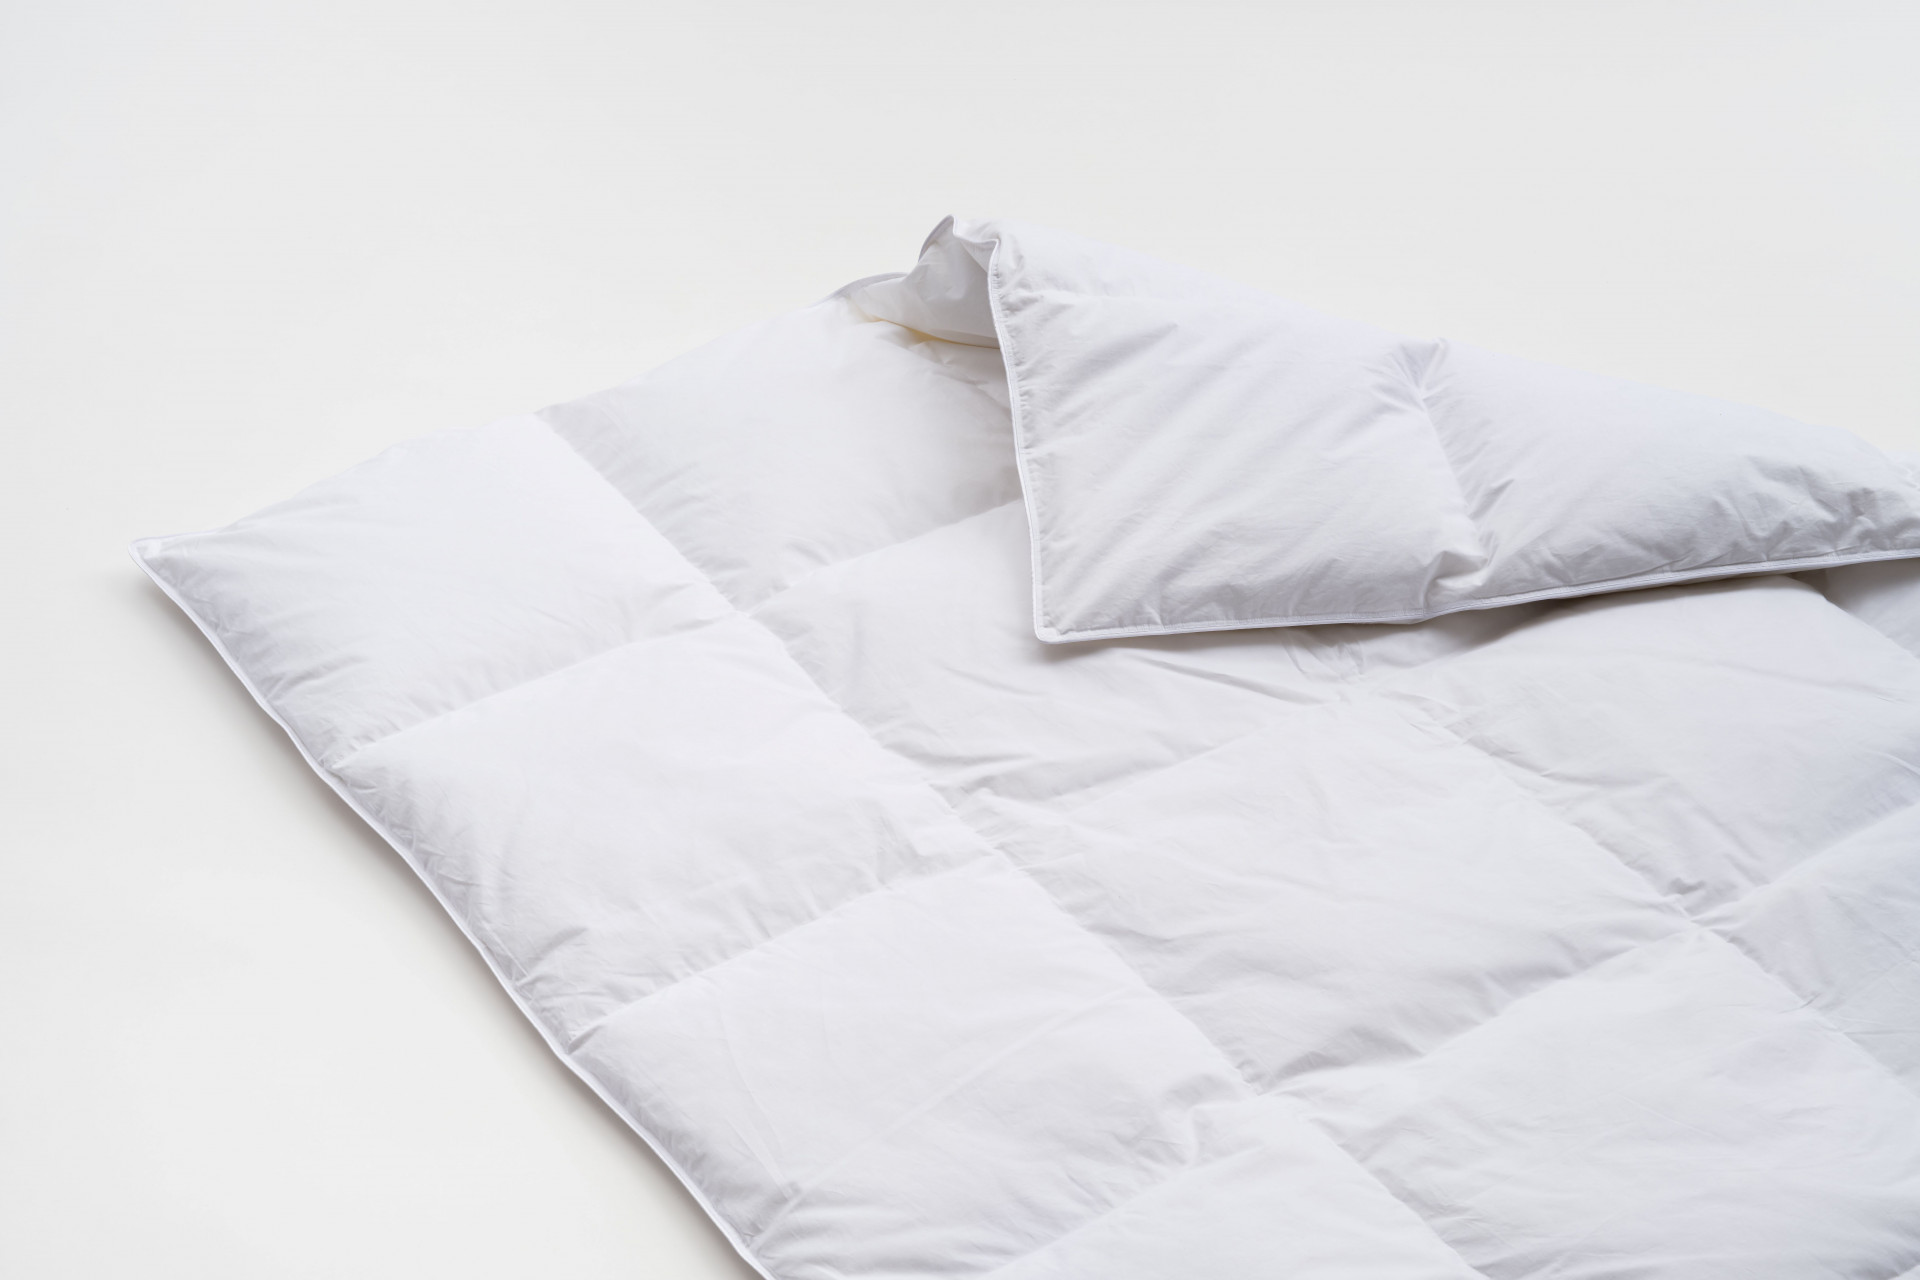 Our fluffy Down Comfort All Season duvets are long-lasting and have superb thermoregulating properties.